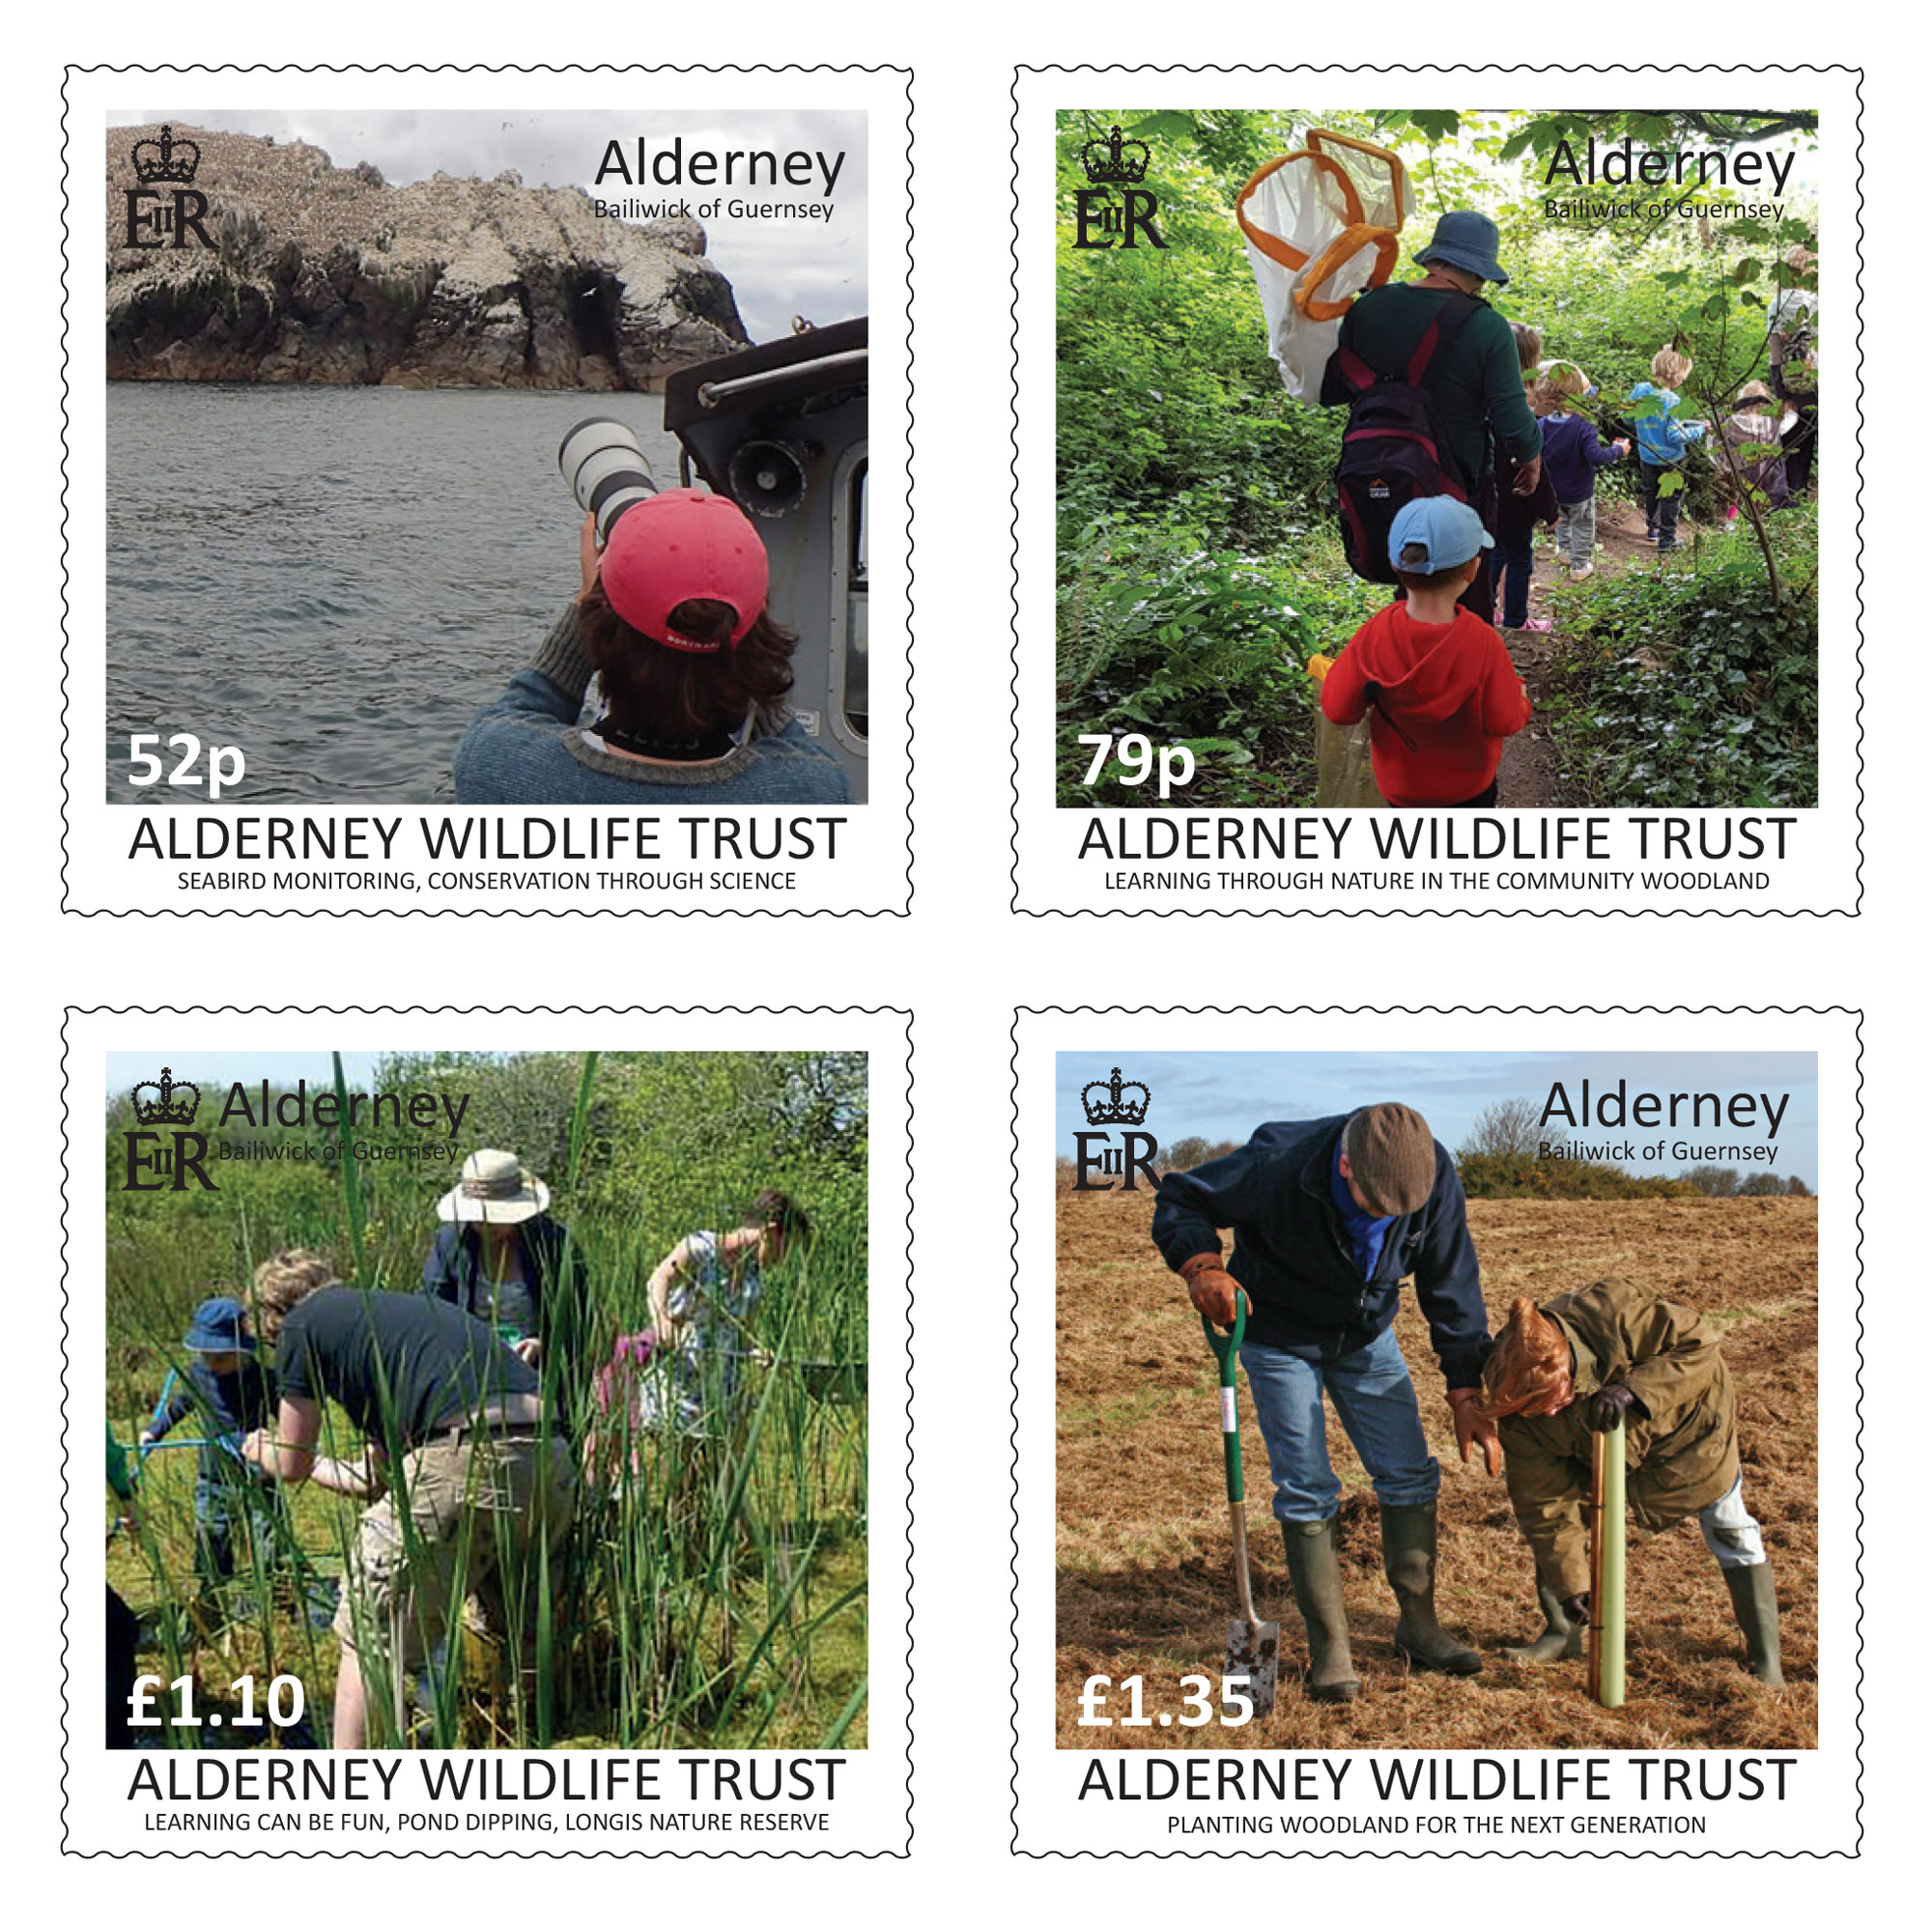 Stamps depict Alderney Wildlife Trust projects to mark charity's 20th anniversary